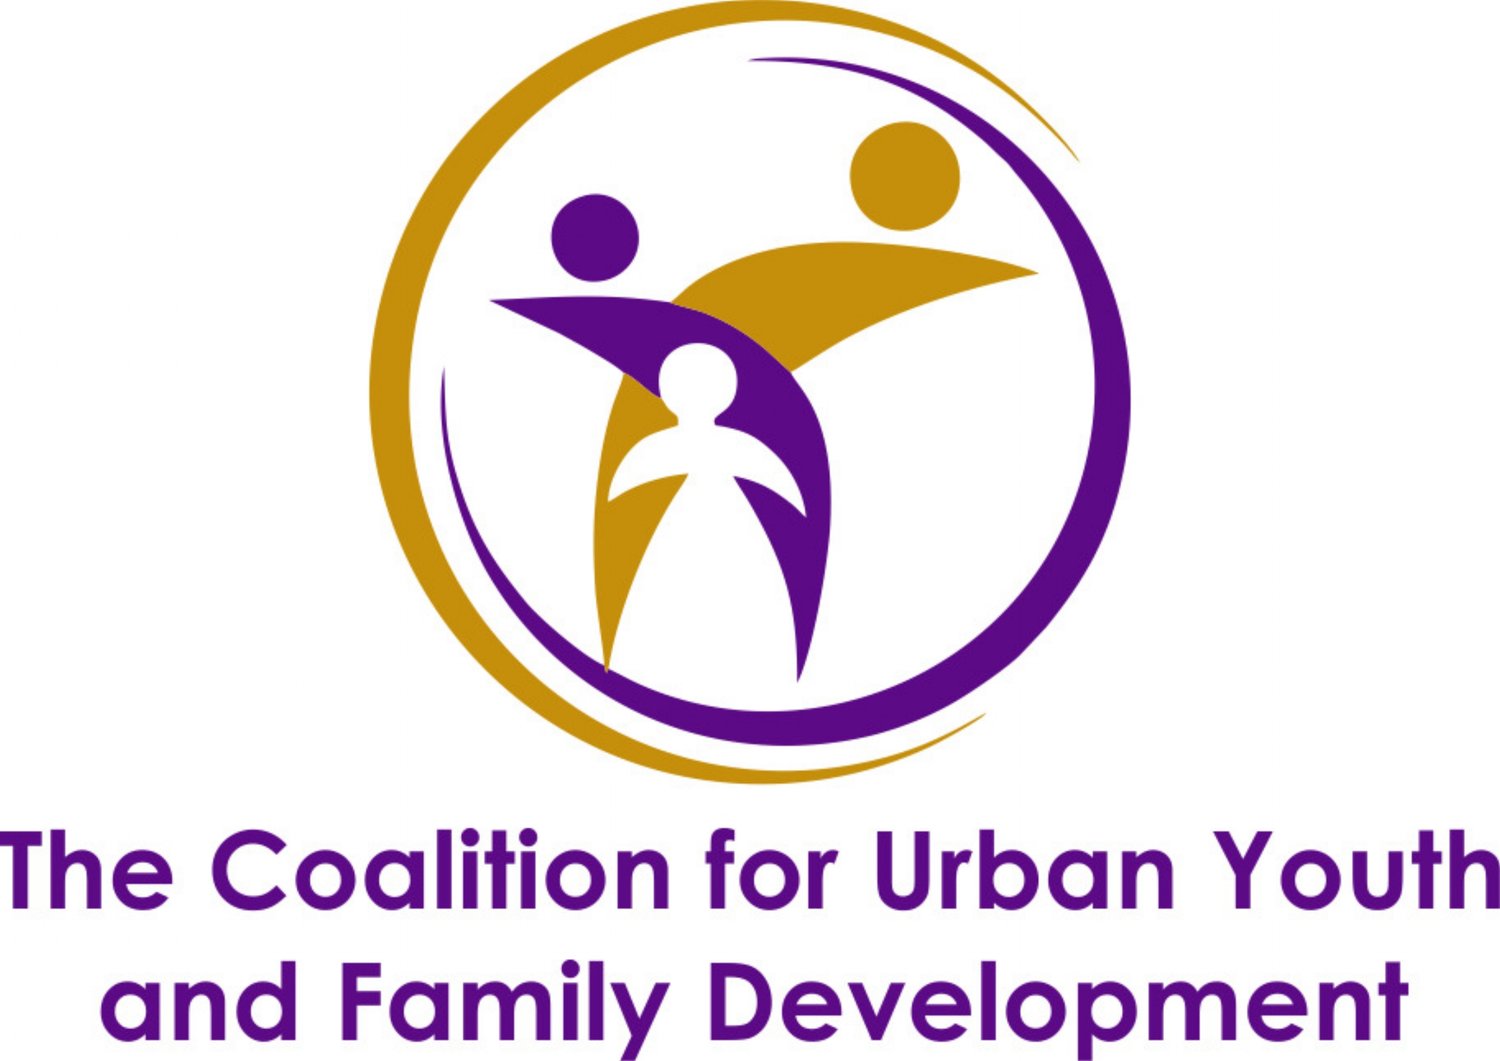 The Coalition for Urban Youth and Family Development